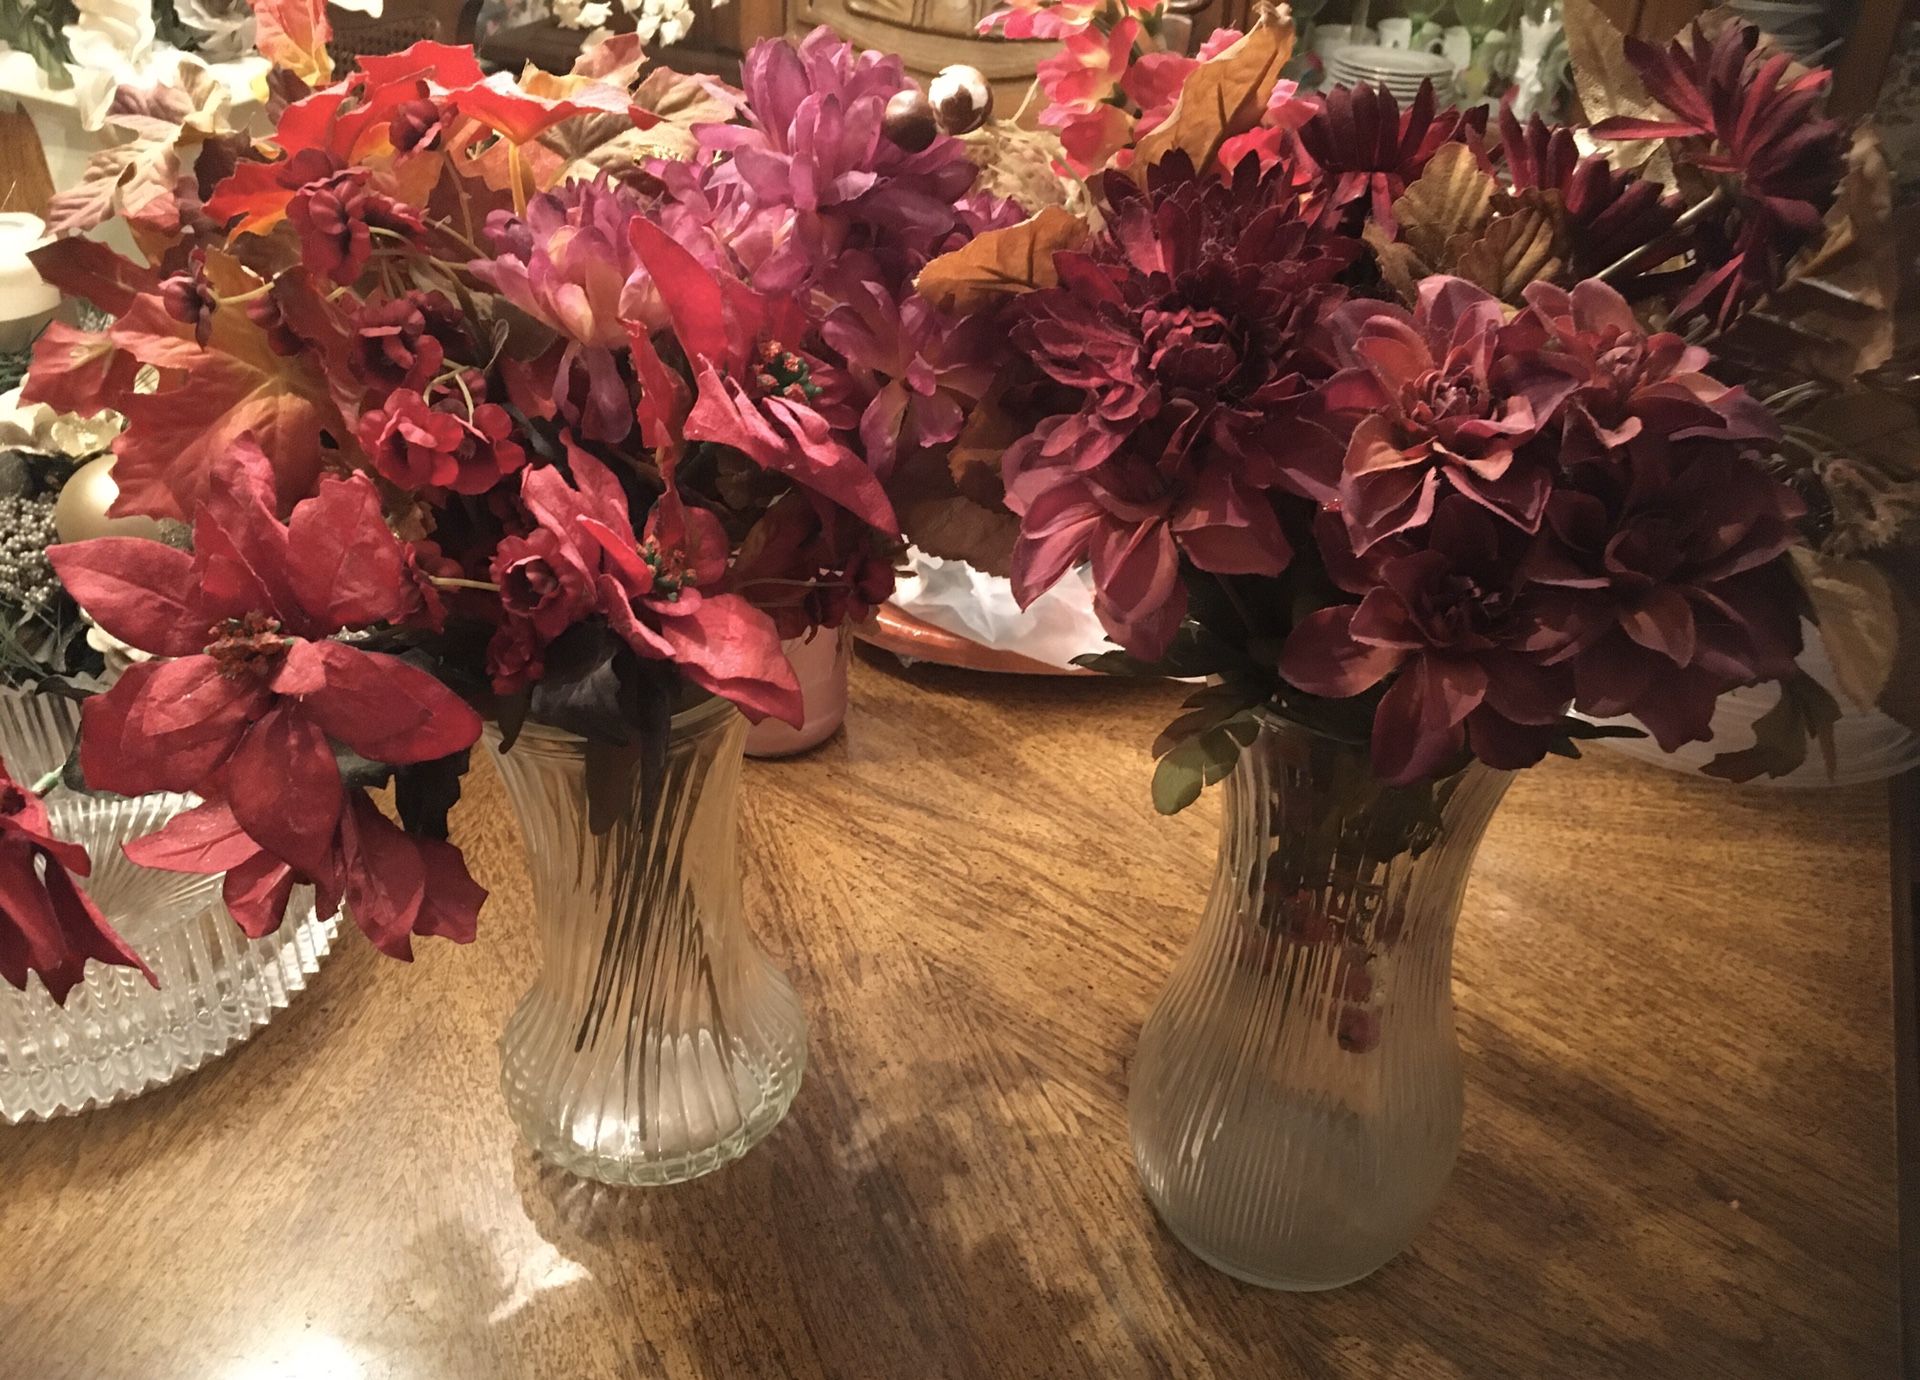 Matching Crystal Vases with Cranberry Fall Flowers